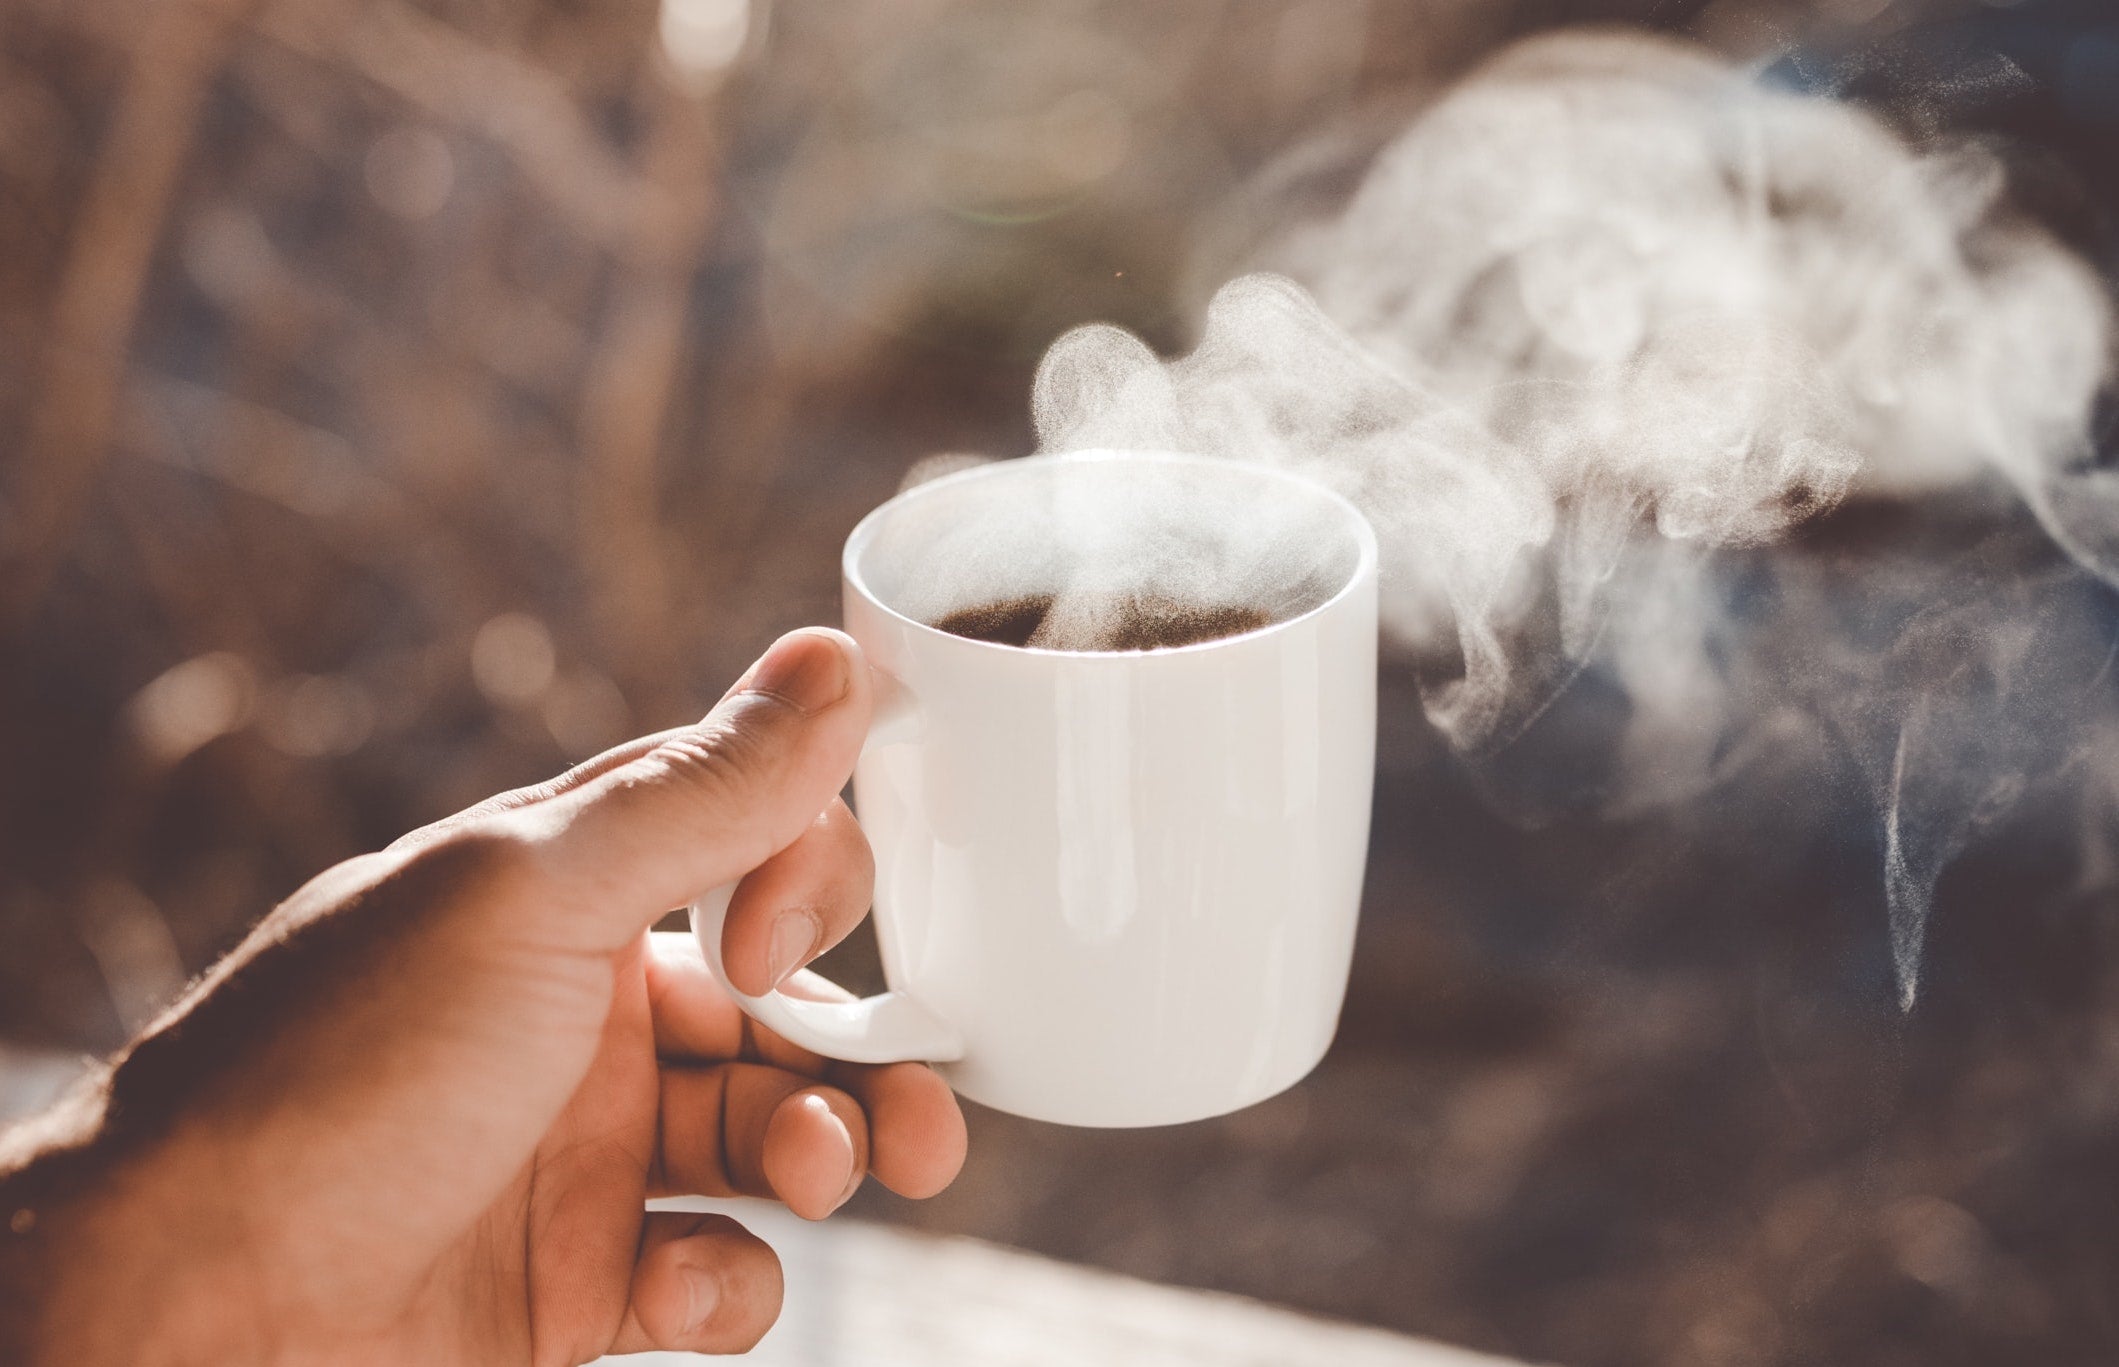 Drinking coffee in the morning is a habit. Build good habits